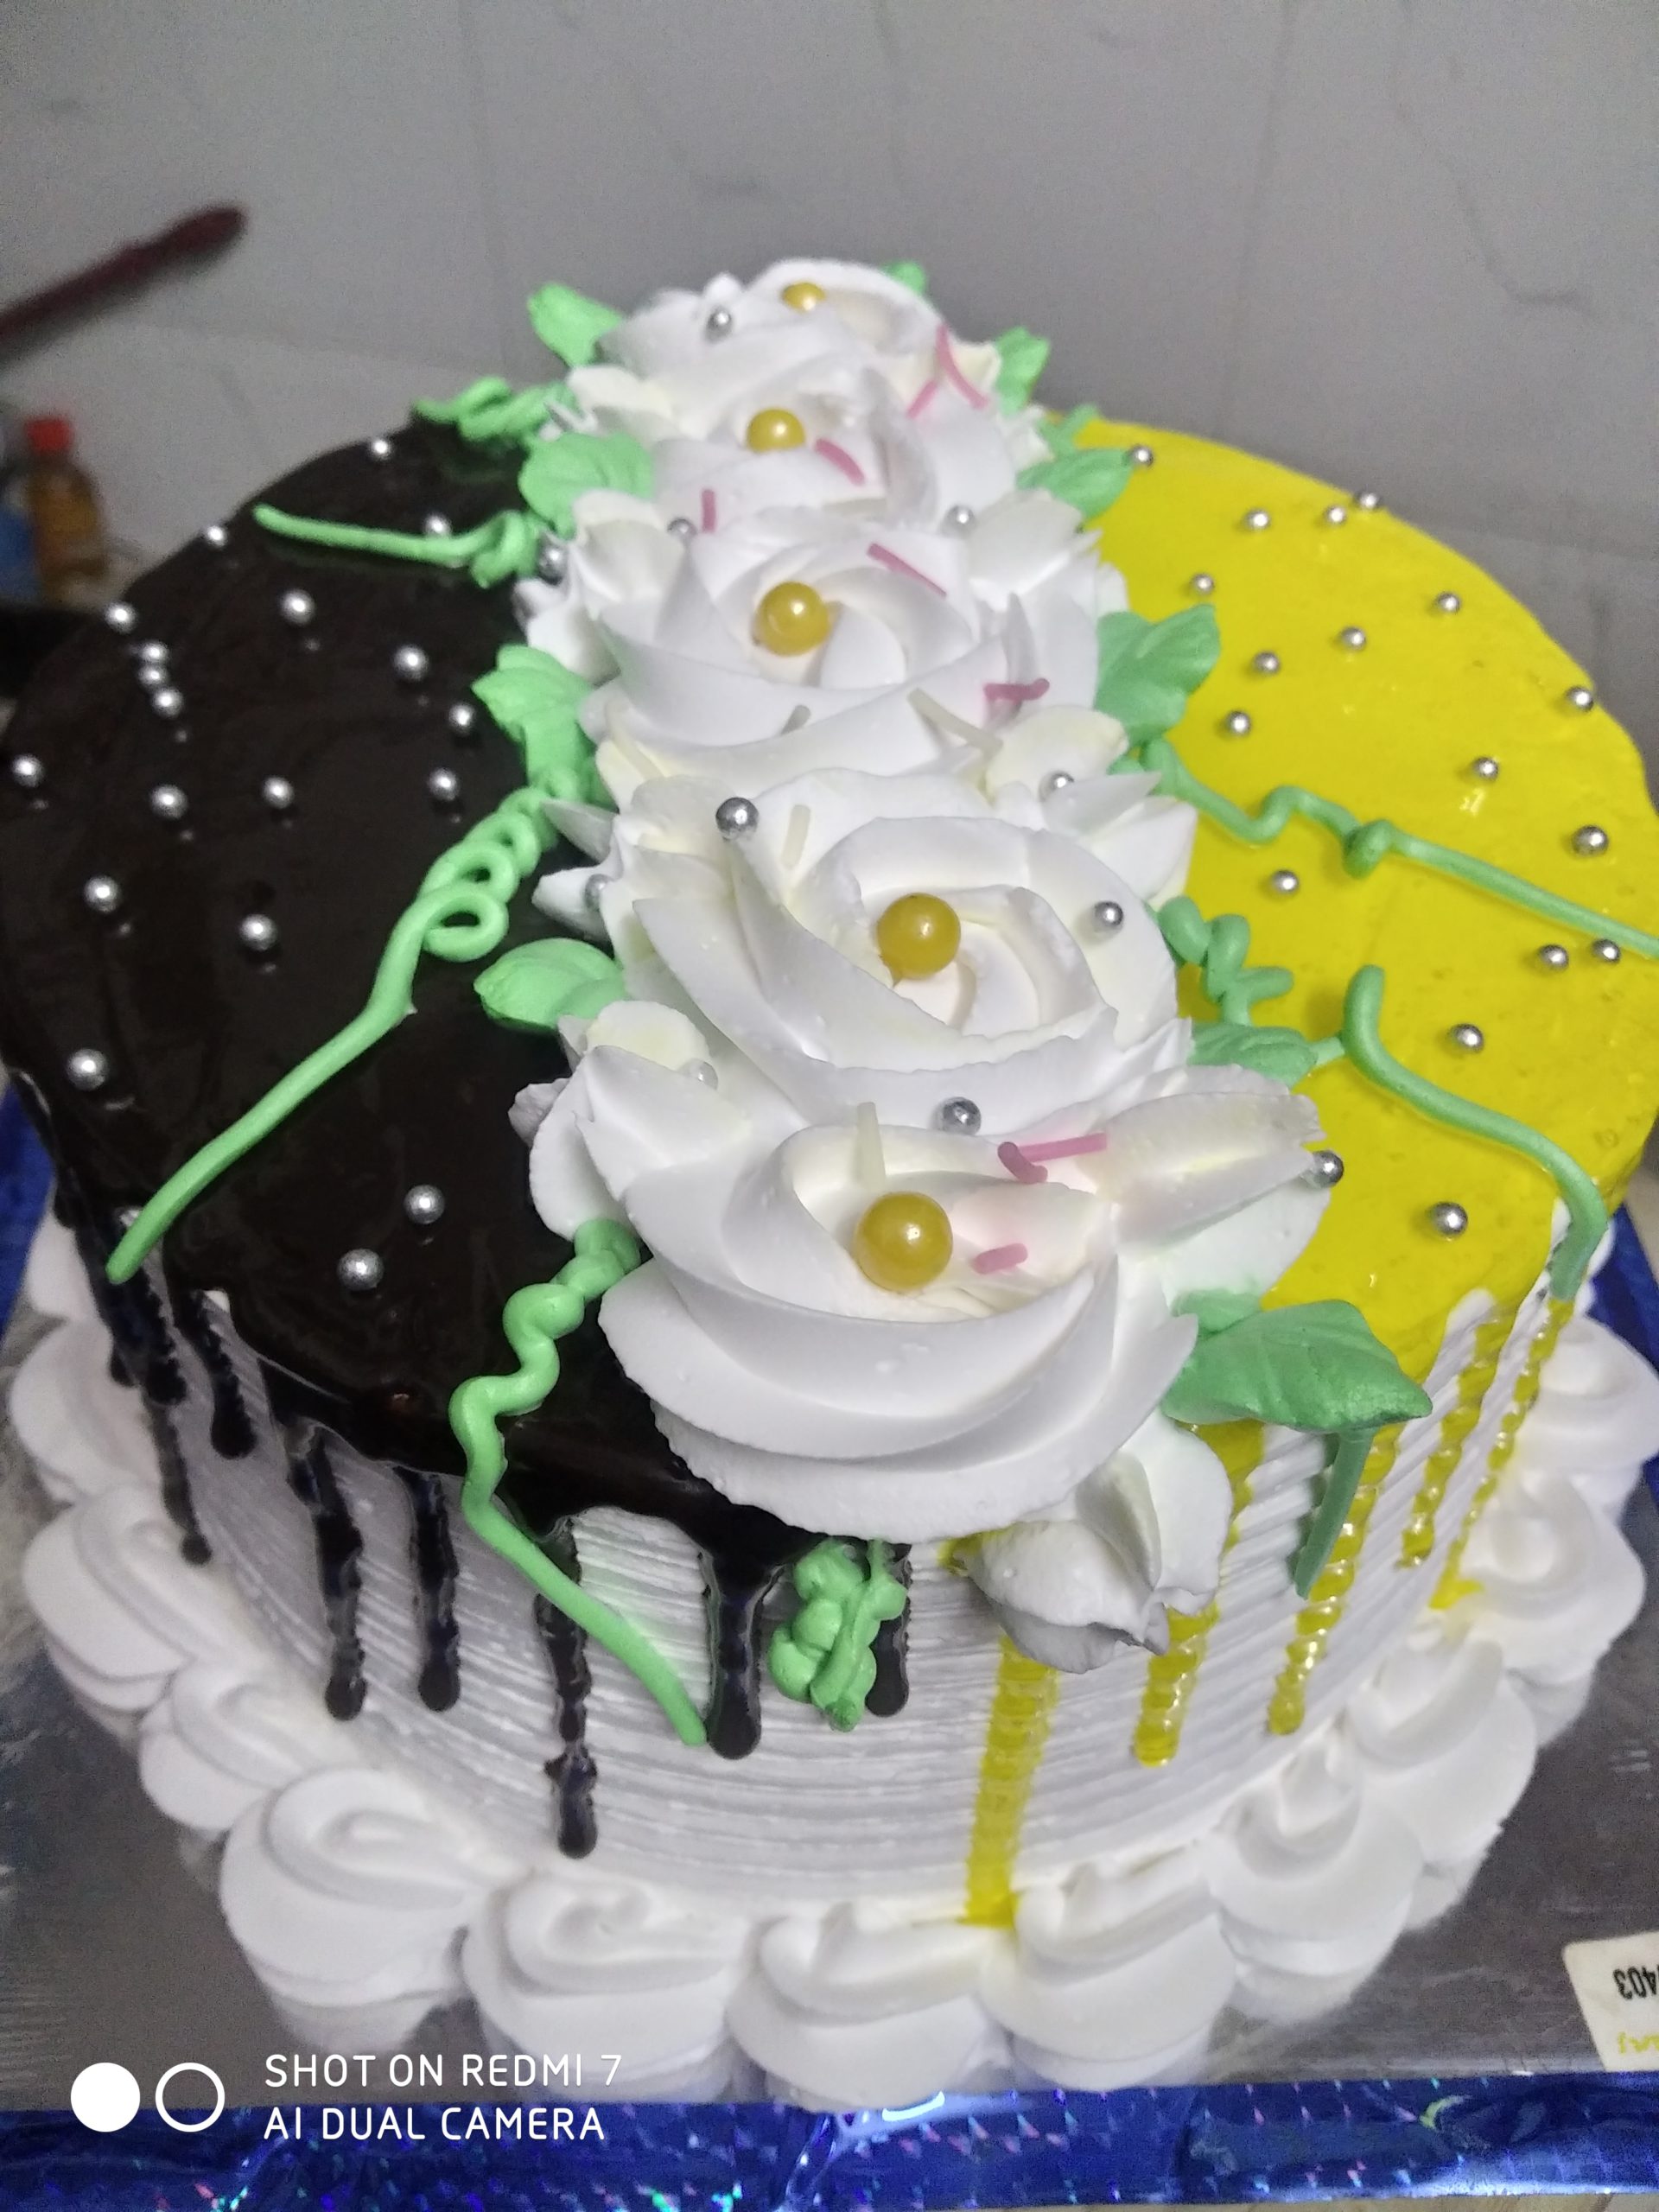 Chocolate n Pineapple Cake (Two in one cake ) Designs, Images, Price Near Me